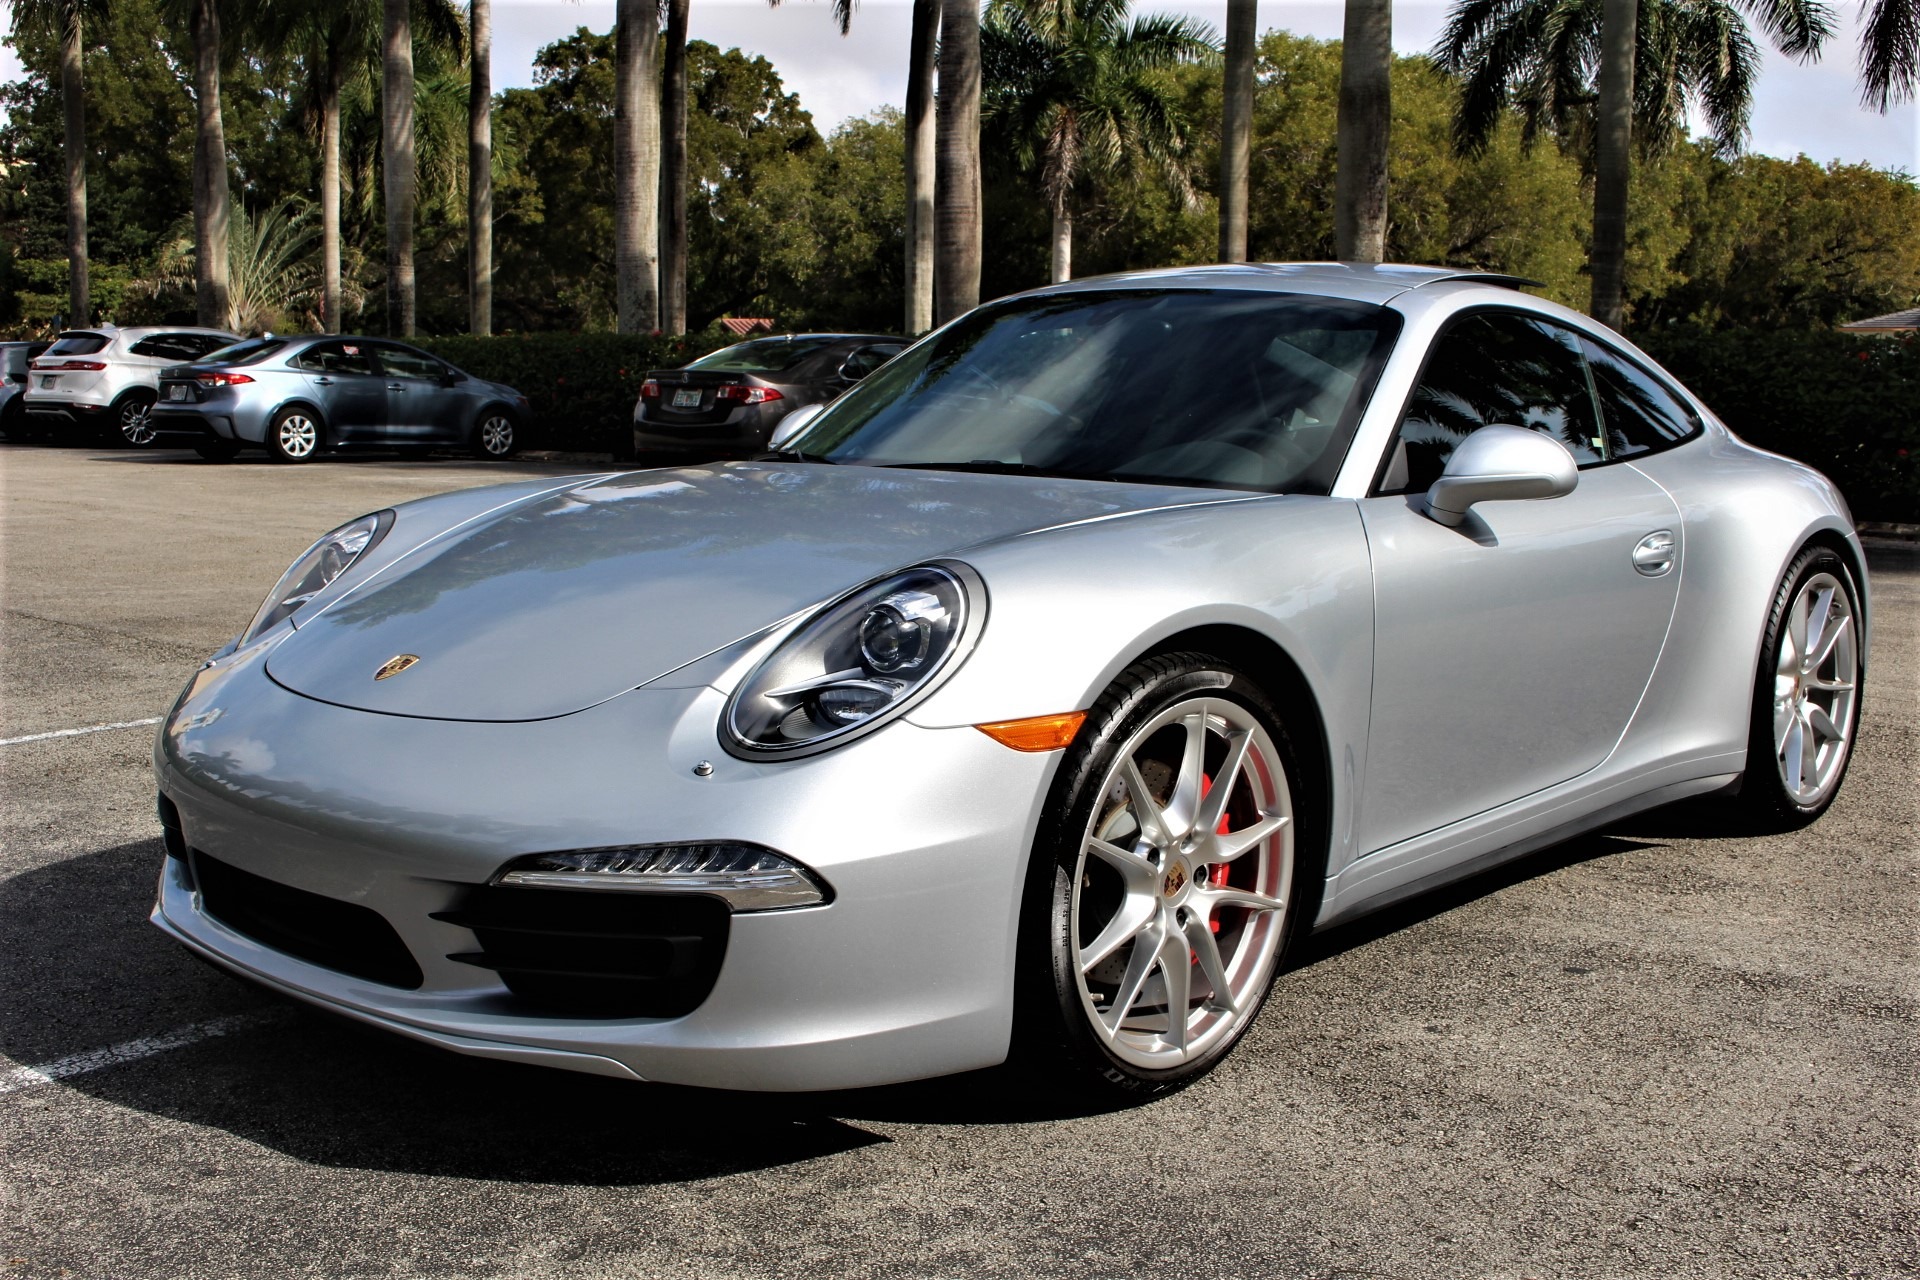 Used 2014 Porsche 911 Carrera 4S for sale Sold at The Gables Sports Cars in Miami FL 33146 4